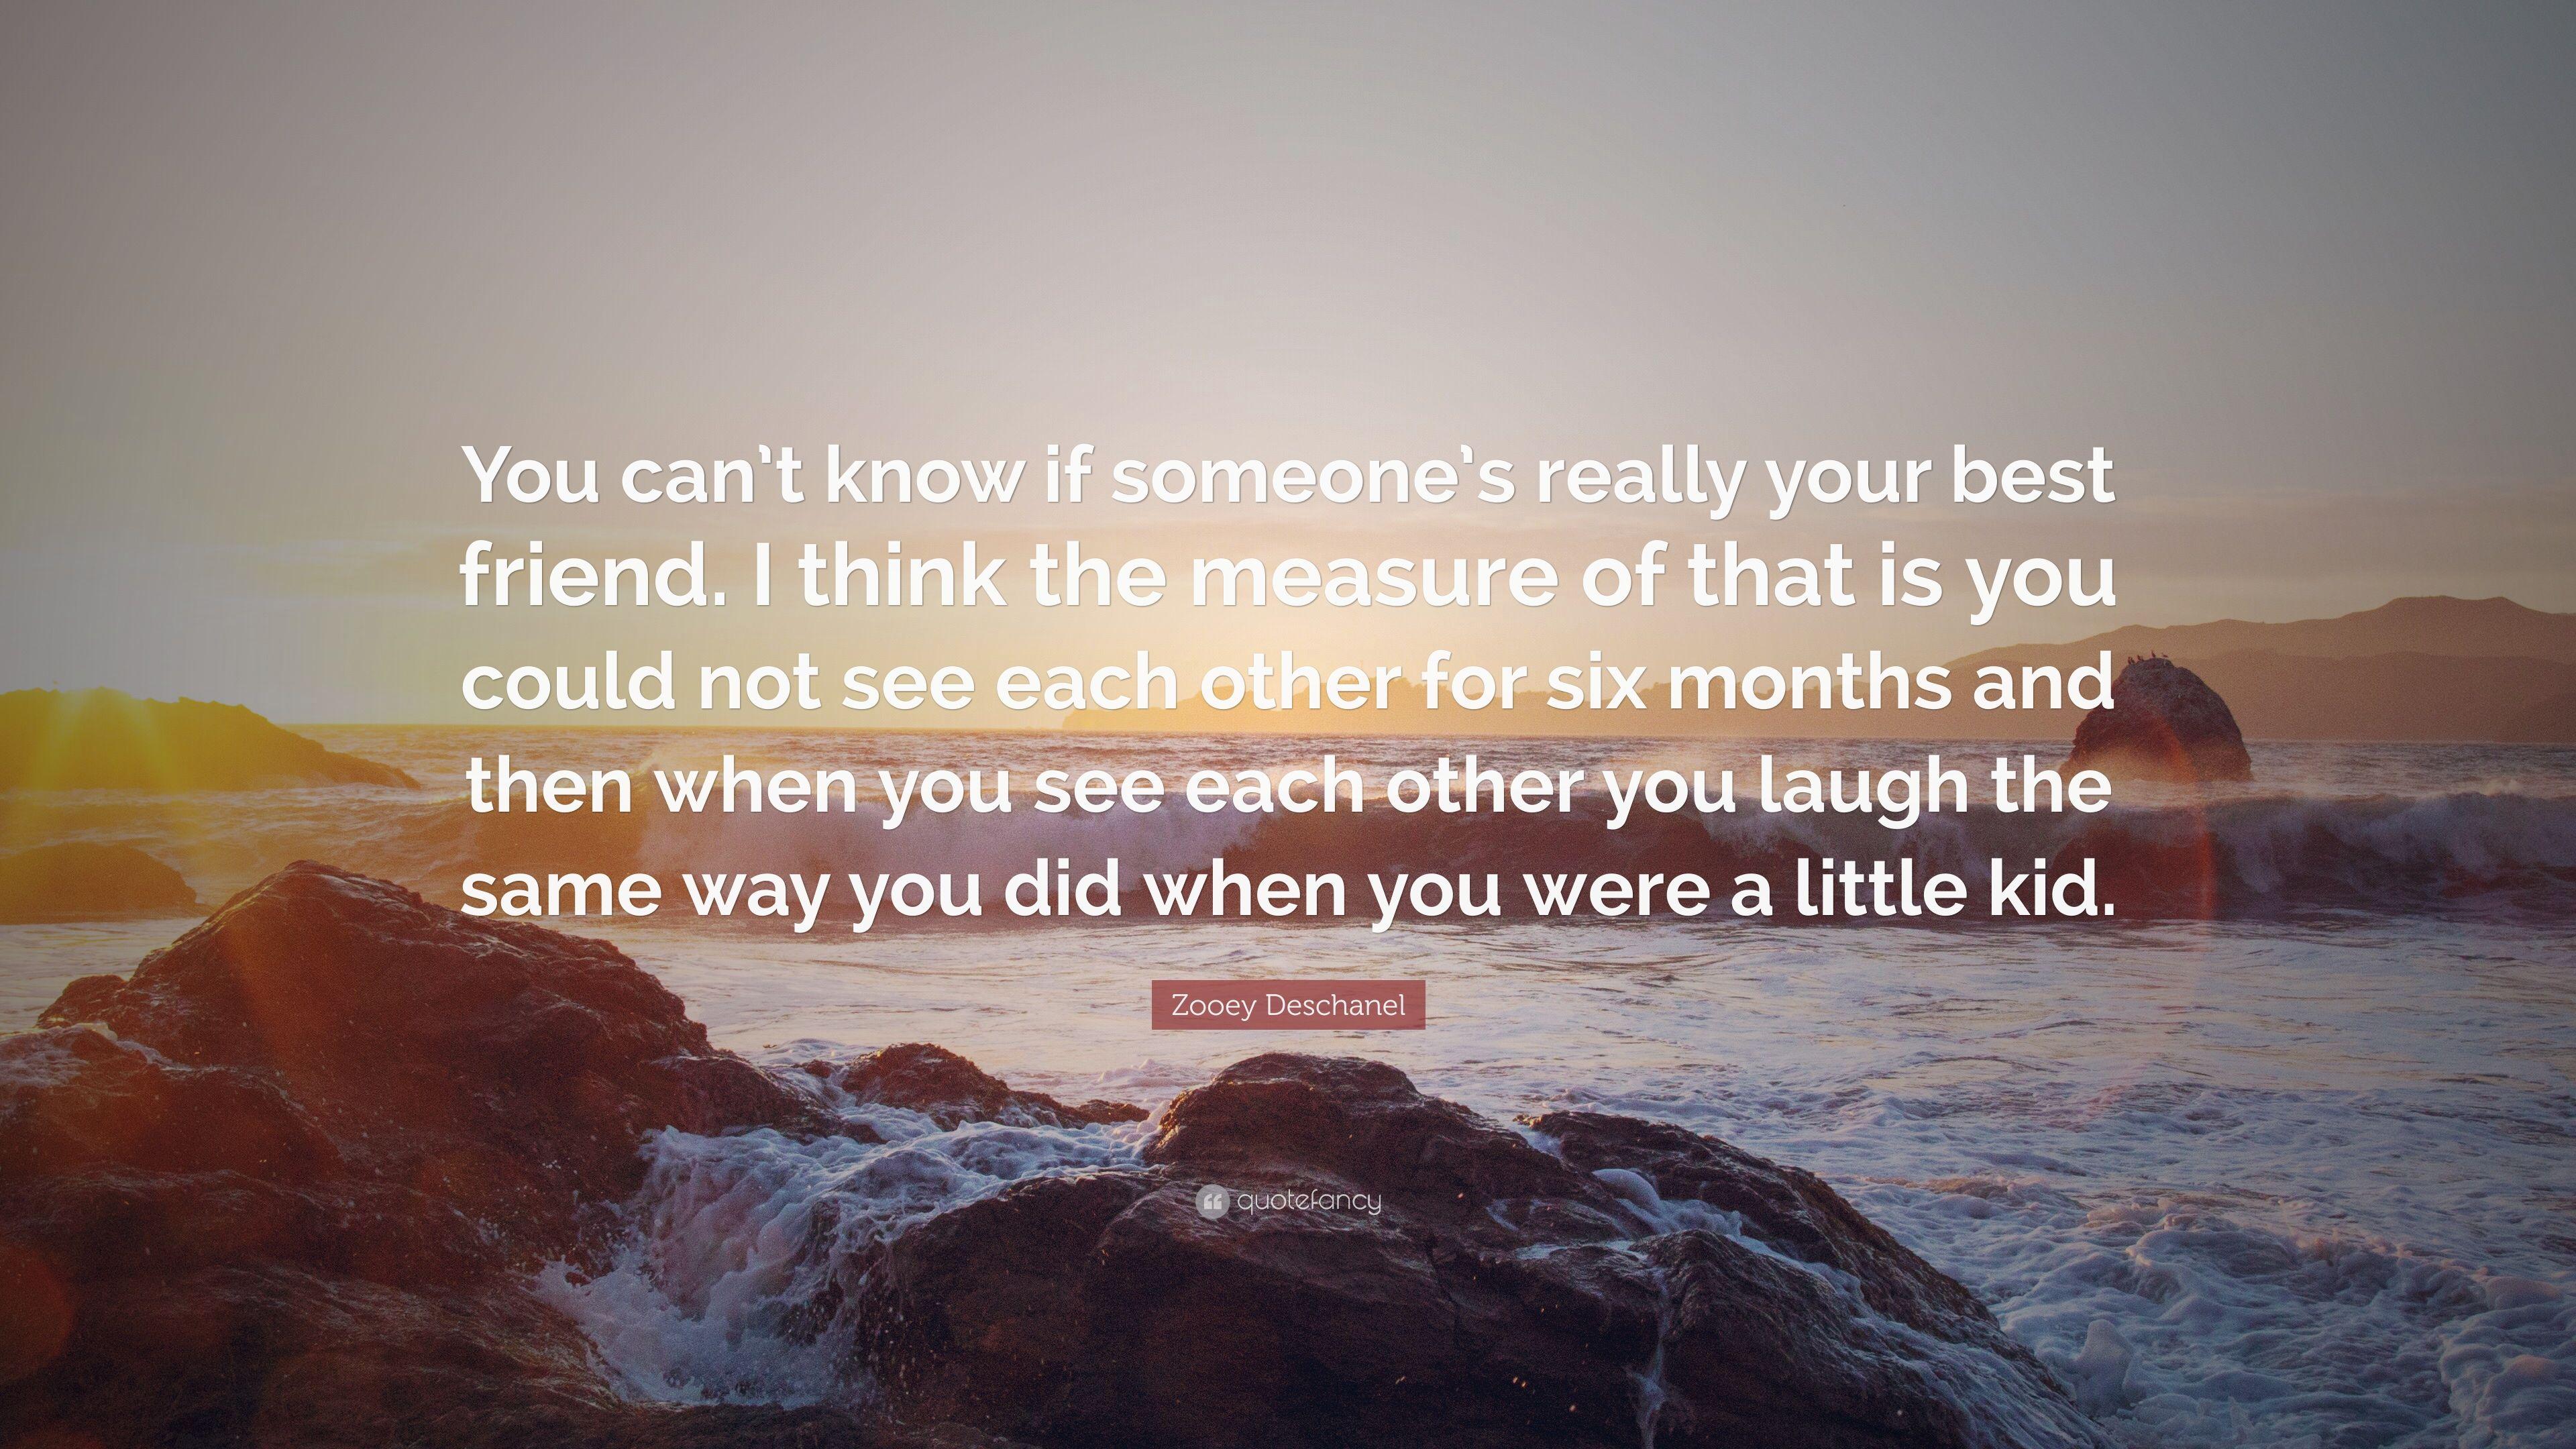 Zooey Deschanel Quote: “You can't know if someone's really your best